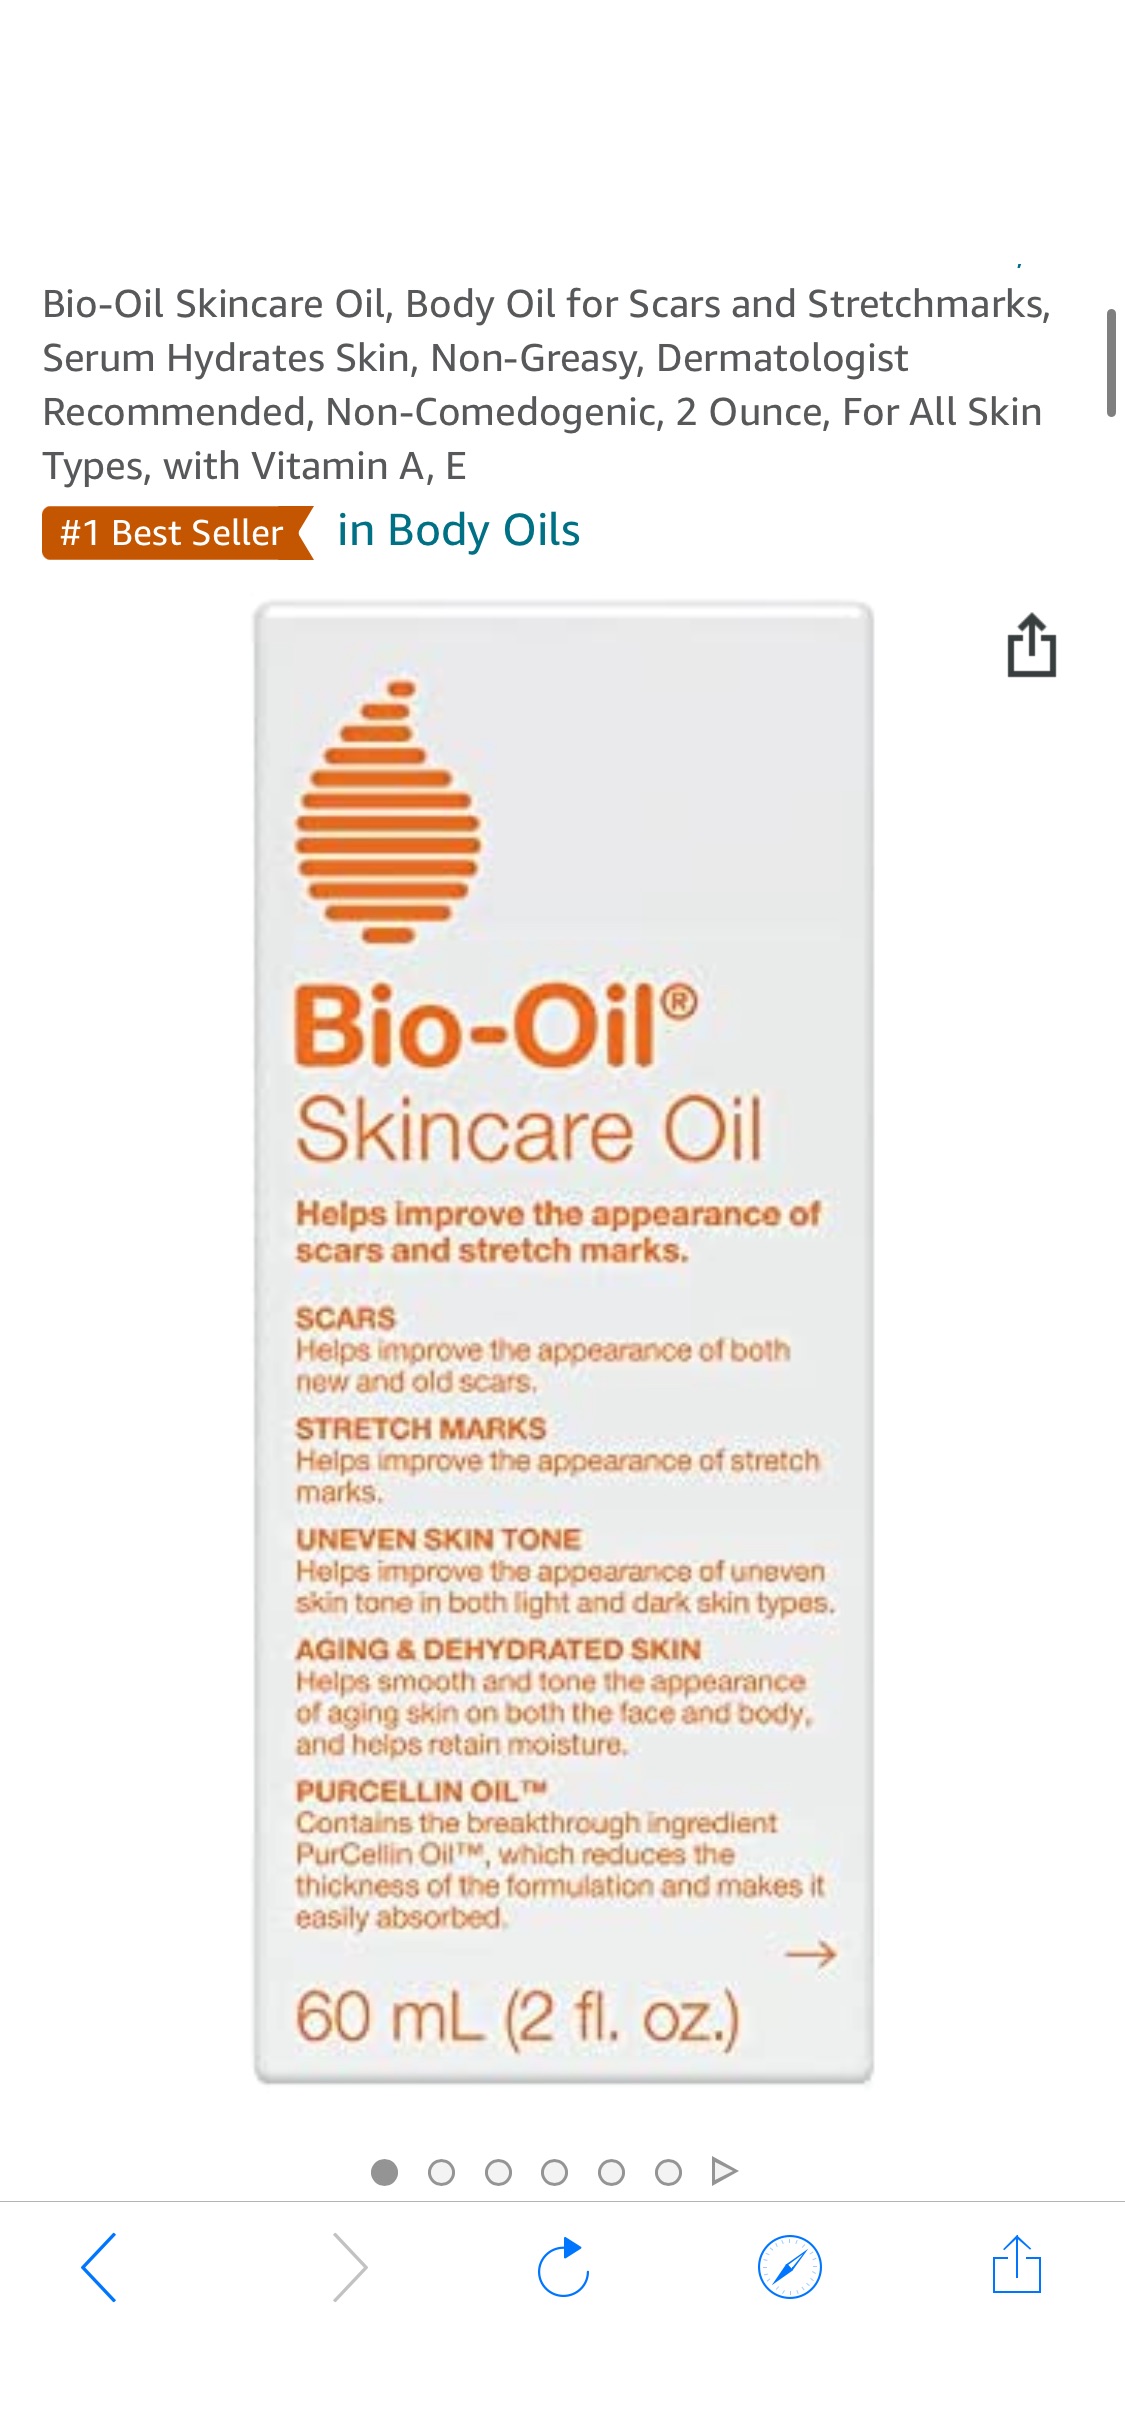 Bio-Oil Skincare Oil, Body Oil for Scars and Stretchmarks, Serum Hydrates Skin, Non-Greasy, Dermatologist Recommended, Non-Comedogenic, 2 Ounce, For All Skin Types, with Vitamin A, E : 祛疤油